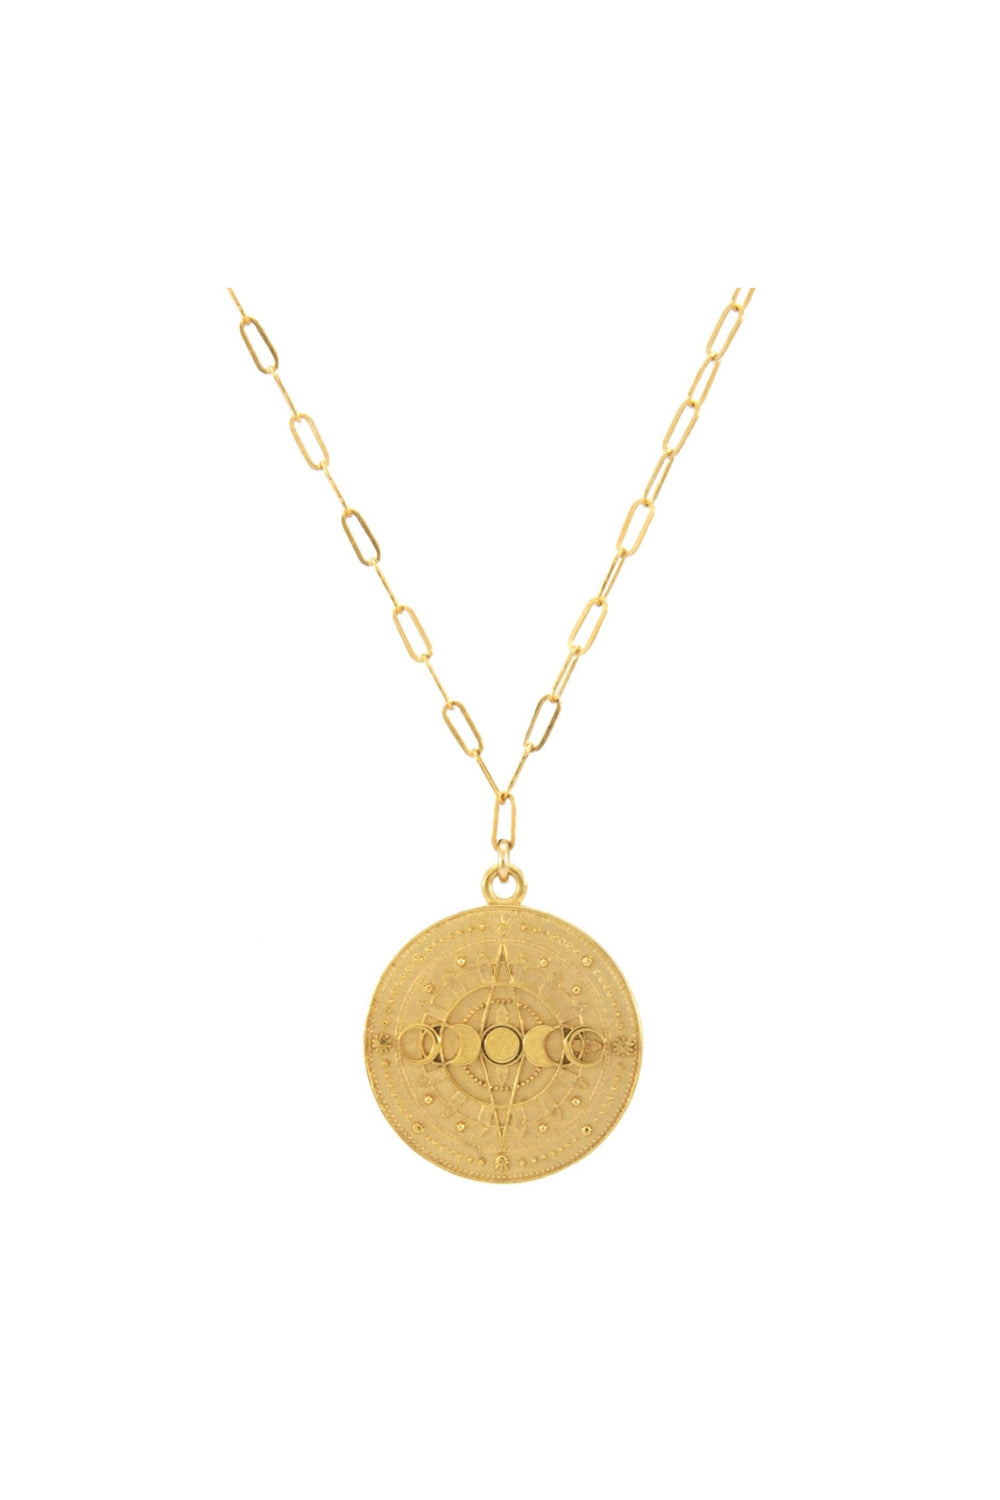 Gold Lunar Phases Necklace